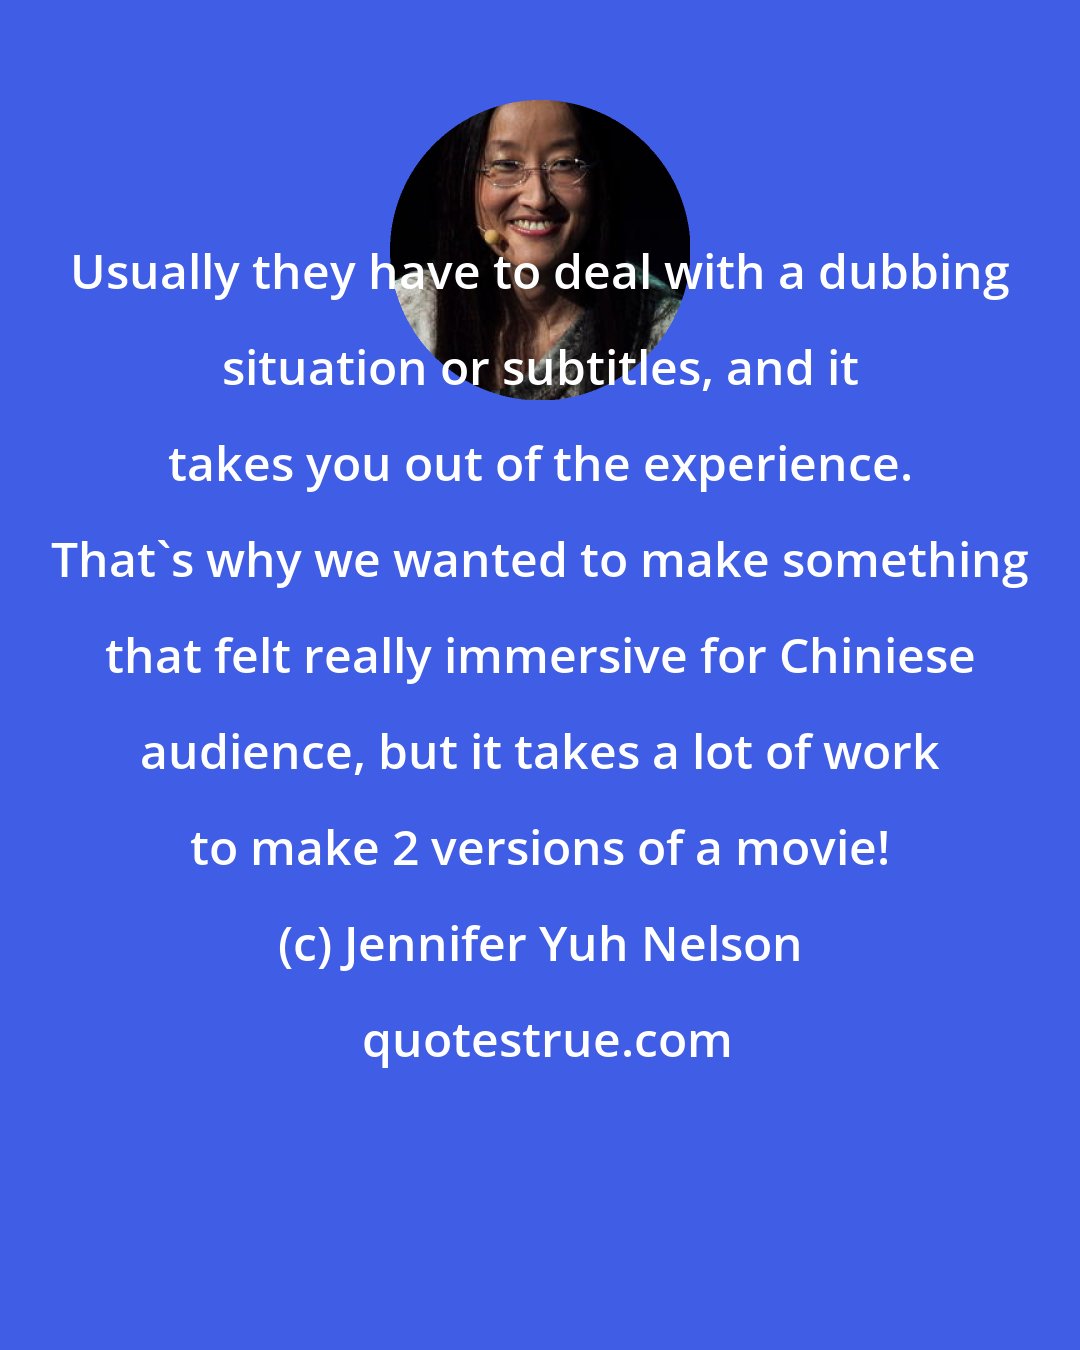 Jennifer Yuh Nelson: Usually they have to deal with a dubbing situation or subtitles, and it takes you out of the experience. That's why we wanted to make something that felt really immersive for Chiniese audience, but it takes a lot of work to make 2 versions of a movie!